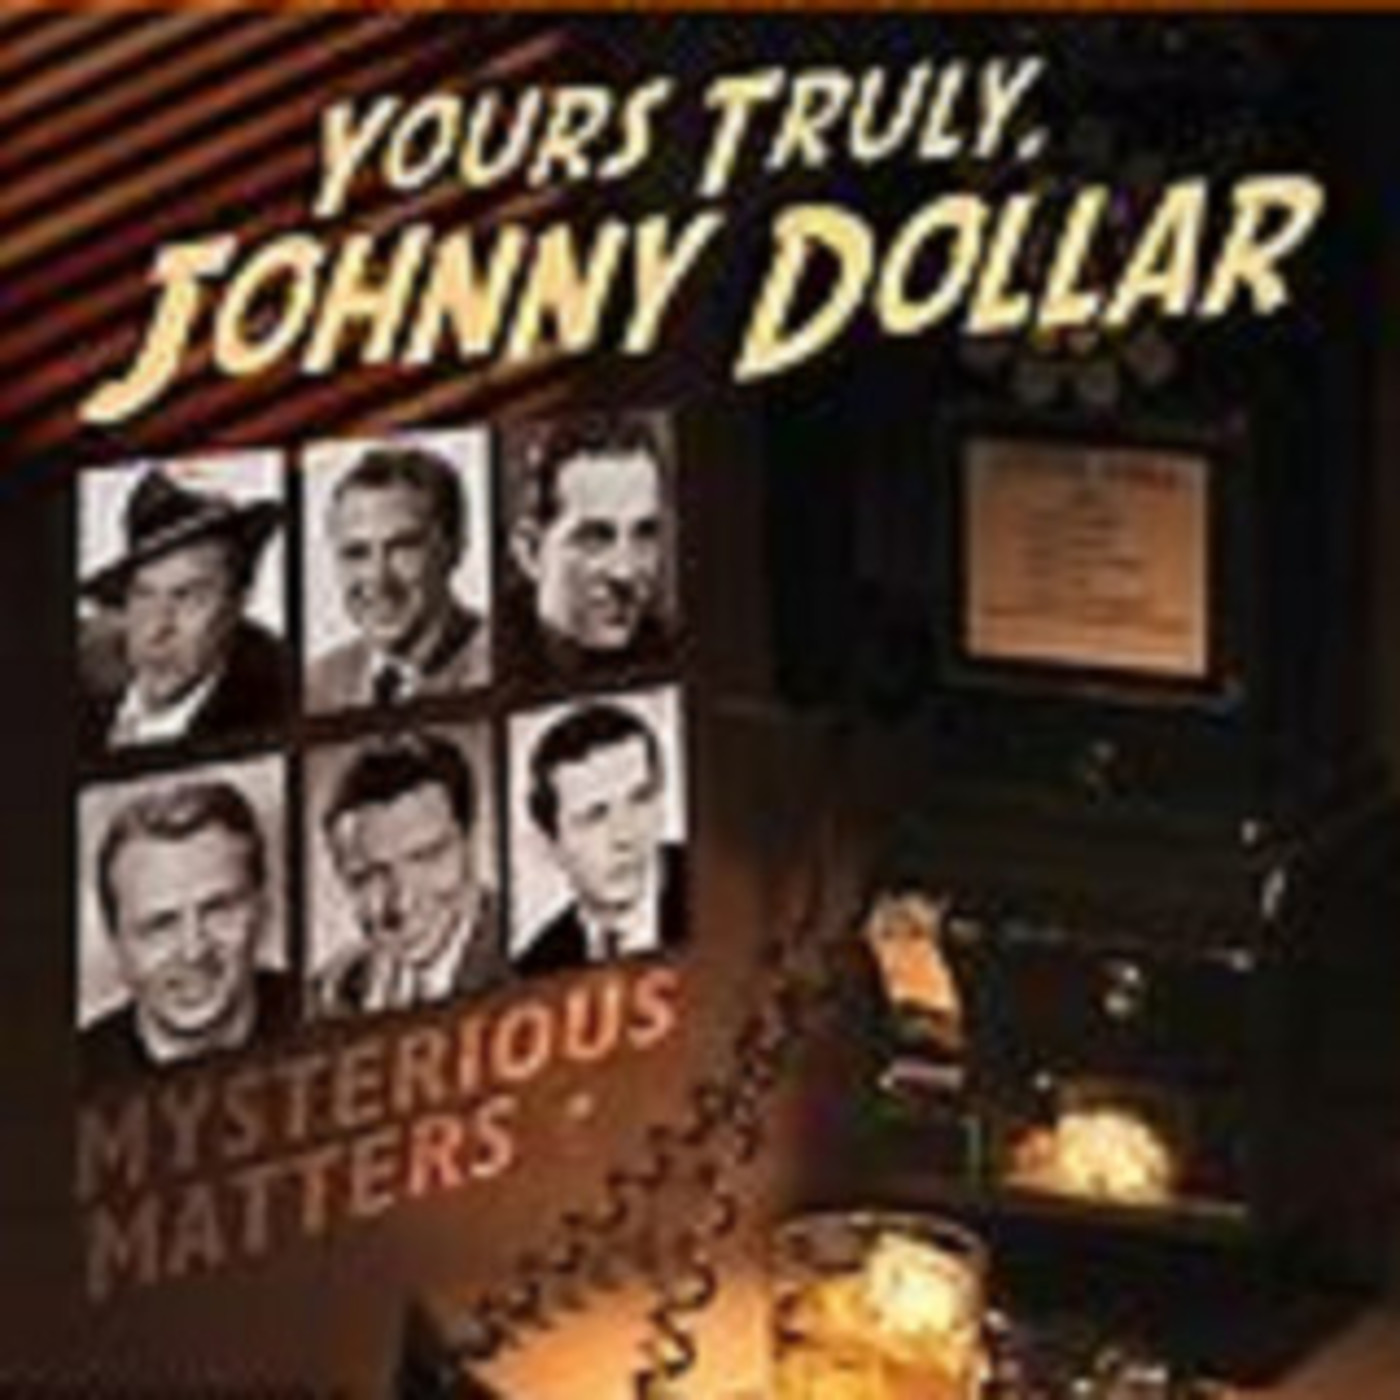 Yours Truly, Johnny Dollar - 052062, episode 792 - The Two Steps to Murder Matter